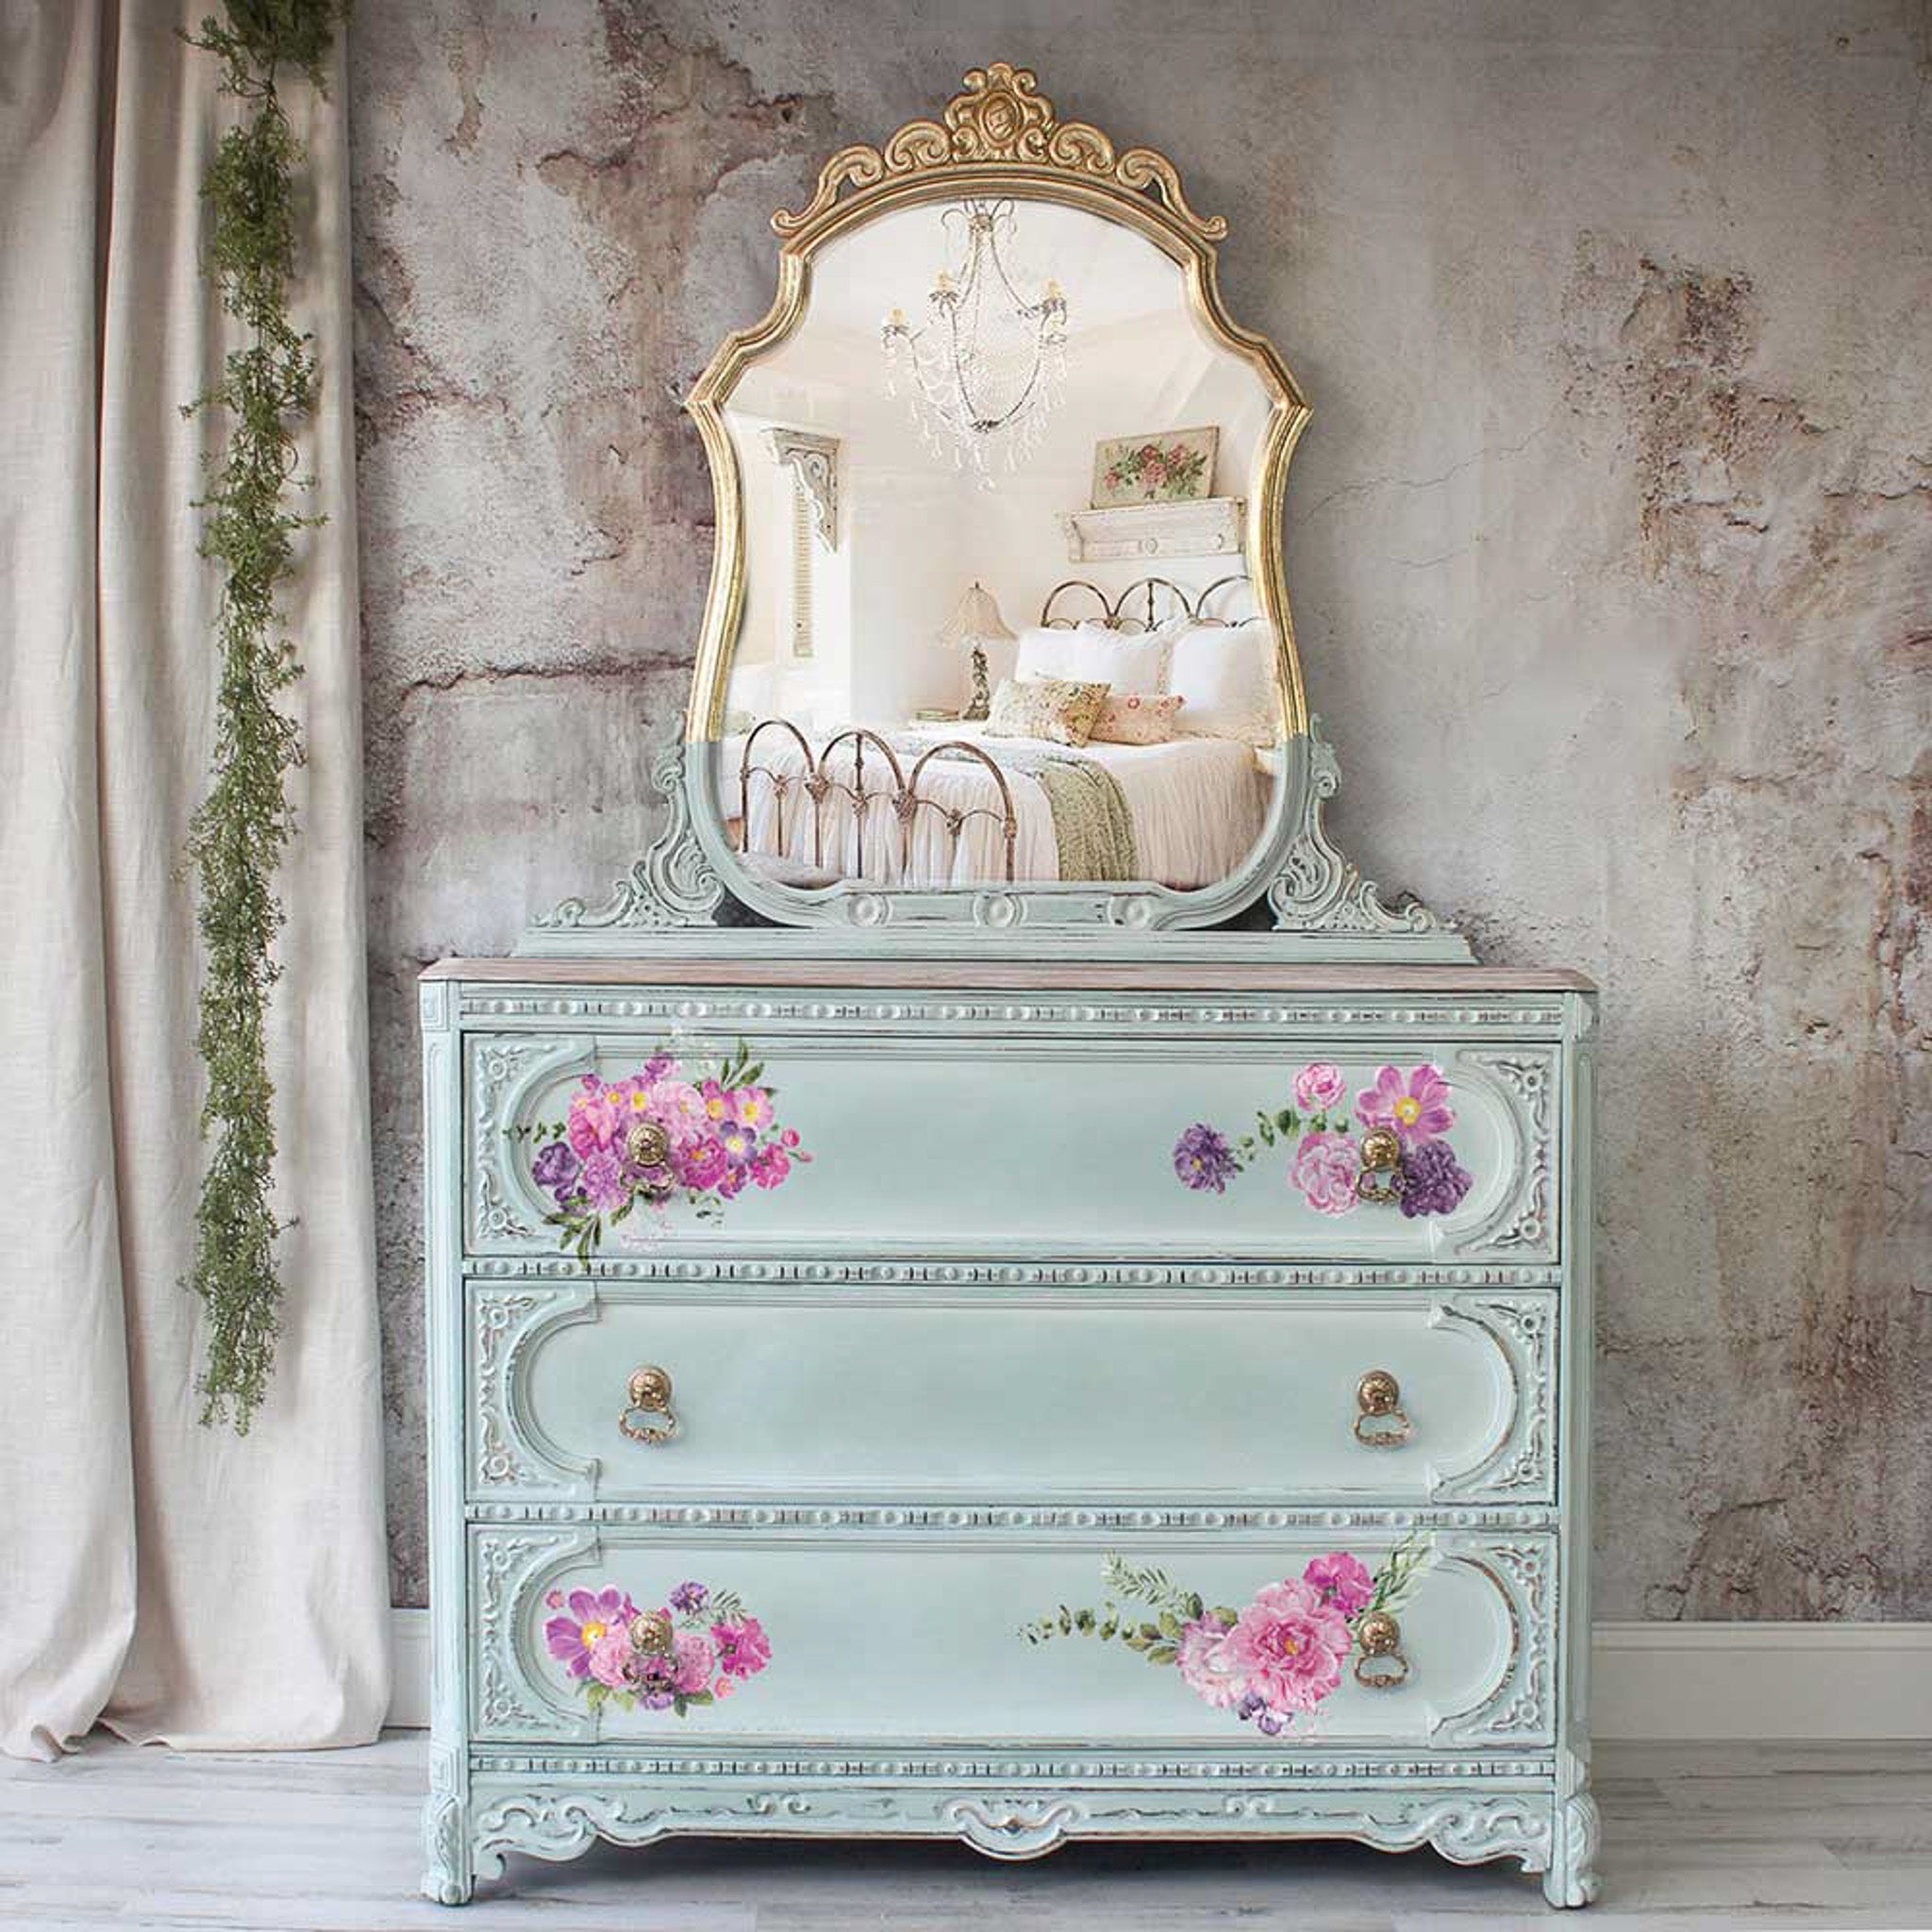 A vintage dresser is painte pale blue and features ReDesign with Prima's Purple Blossom small transfer on its drawers.